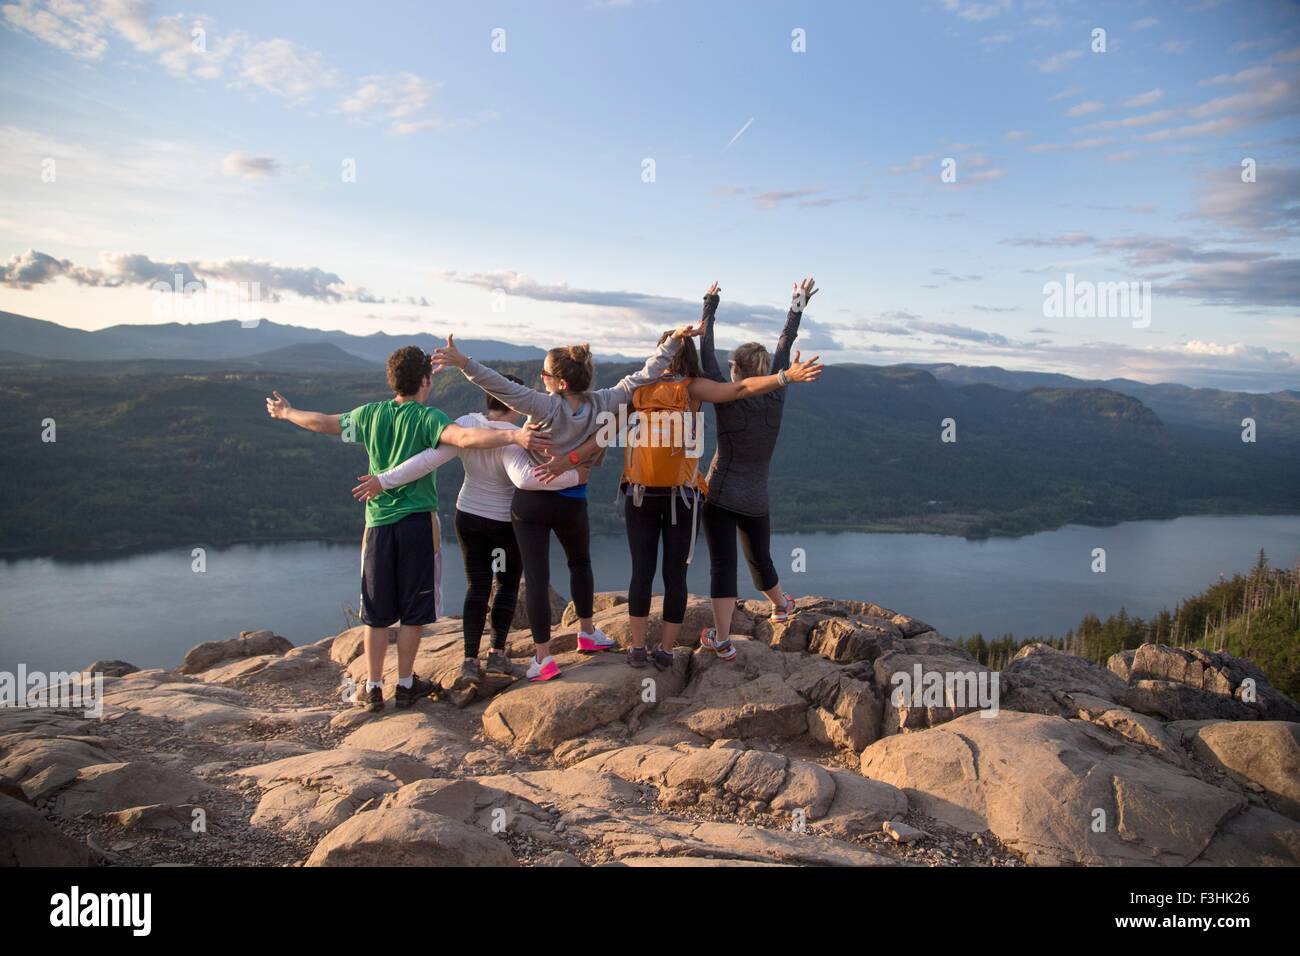 Friends enjoying view on hill, Angel's Rest, Columbia River Gorge, Oregon, USA Stock Photo